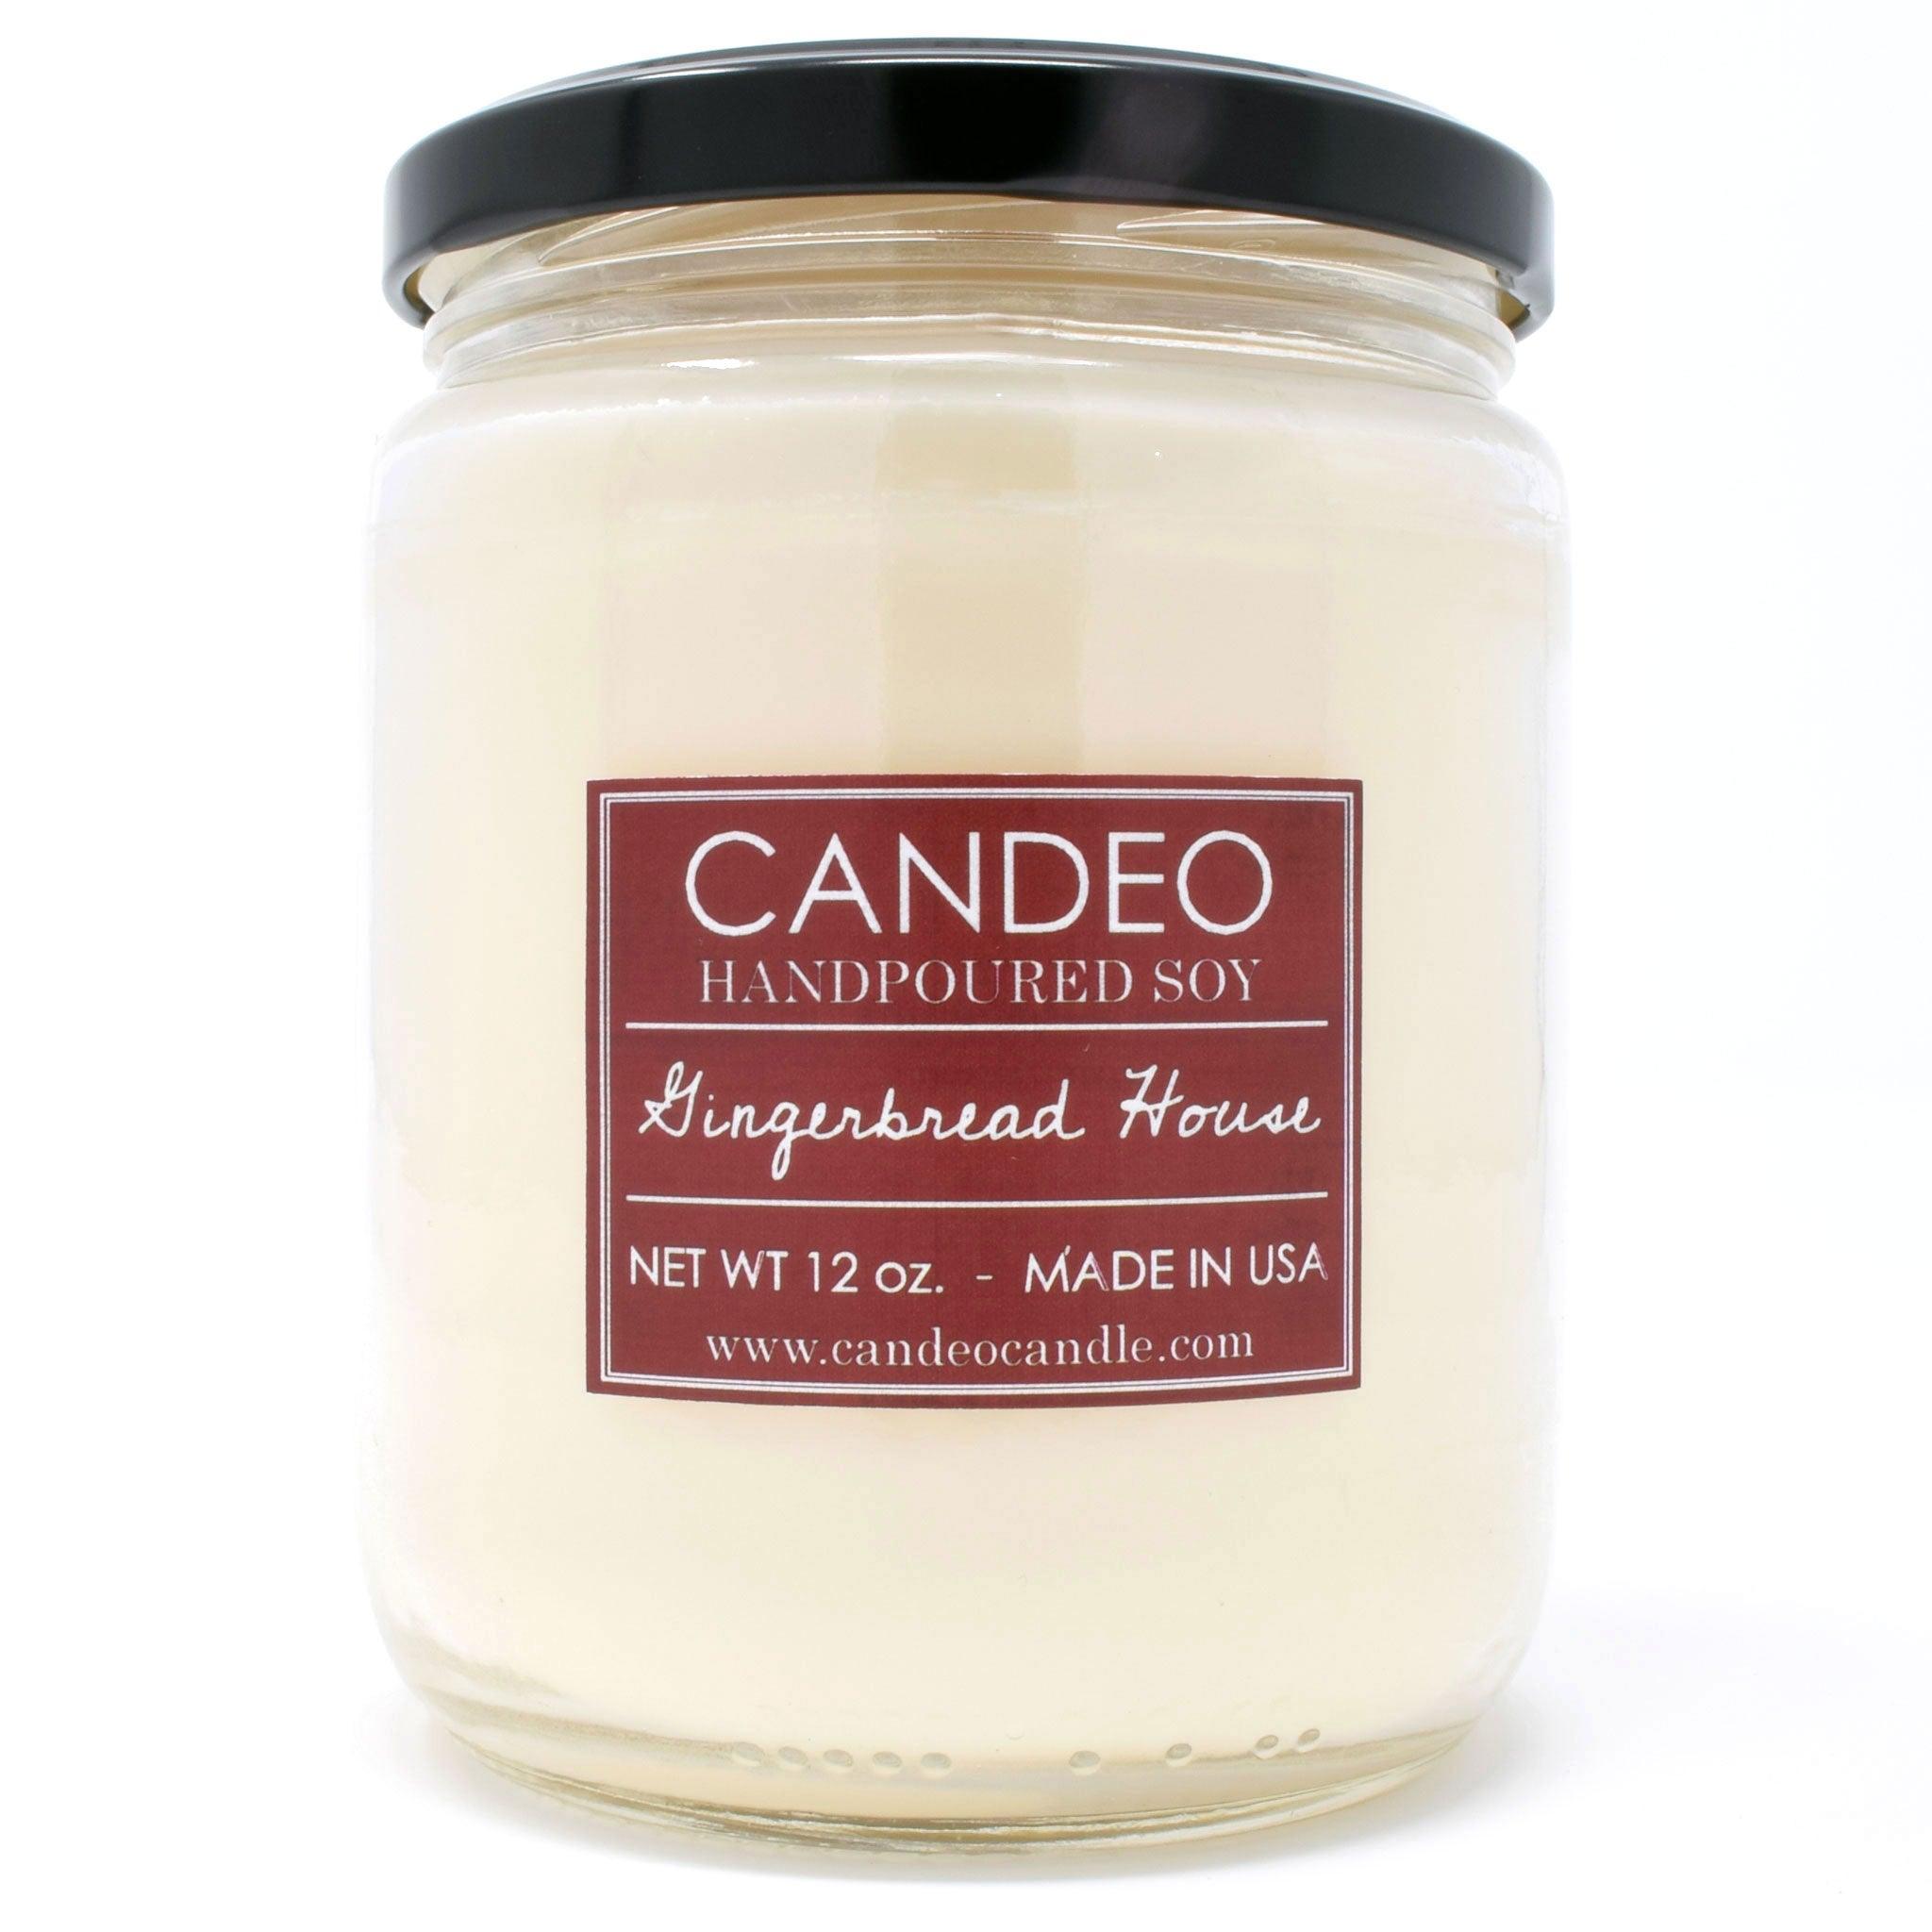 Gingerbread House, 14oz Soy Candle Jar - Candeo Candle